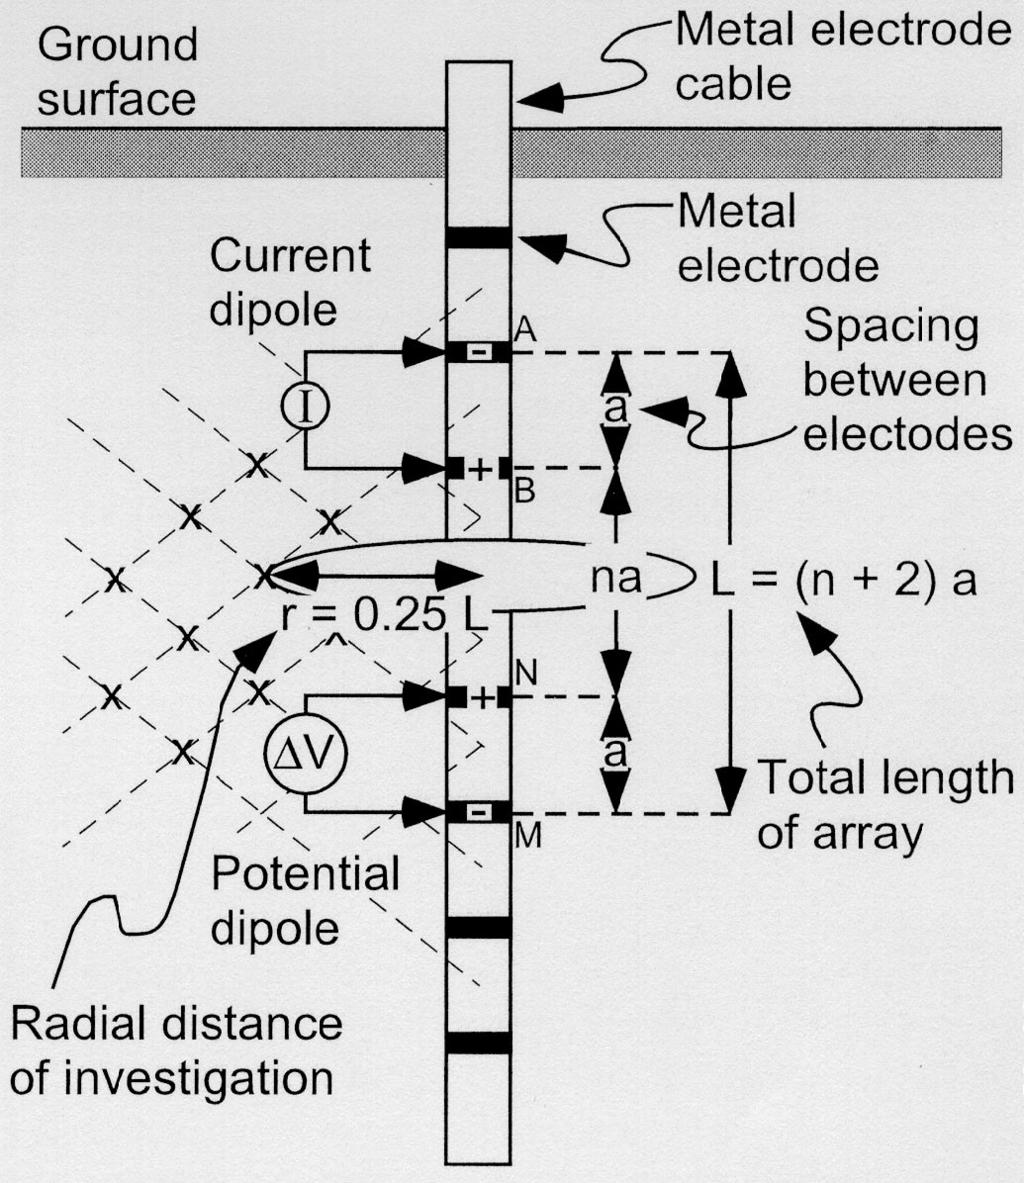 Values of apparent resistivity depend on the true electrical resistivities of all the components in the materials inside a ellipsoidal volume of half-axis equal to the radial distance and roughly